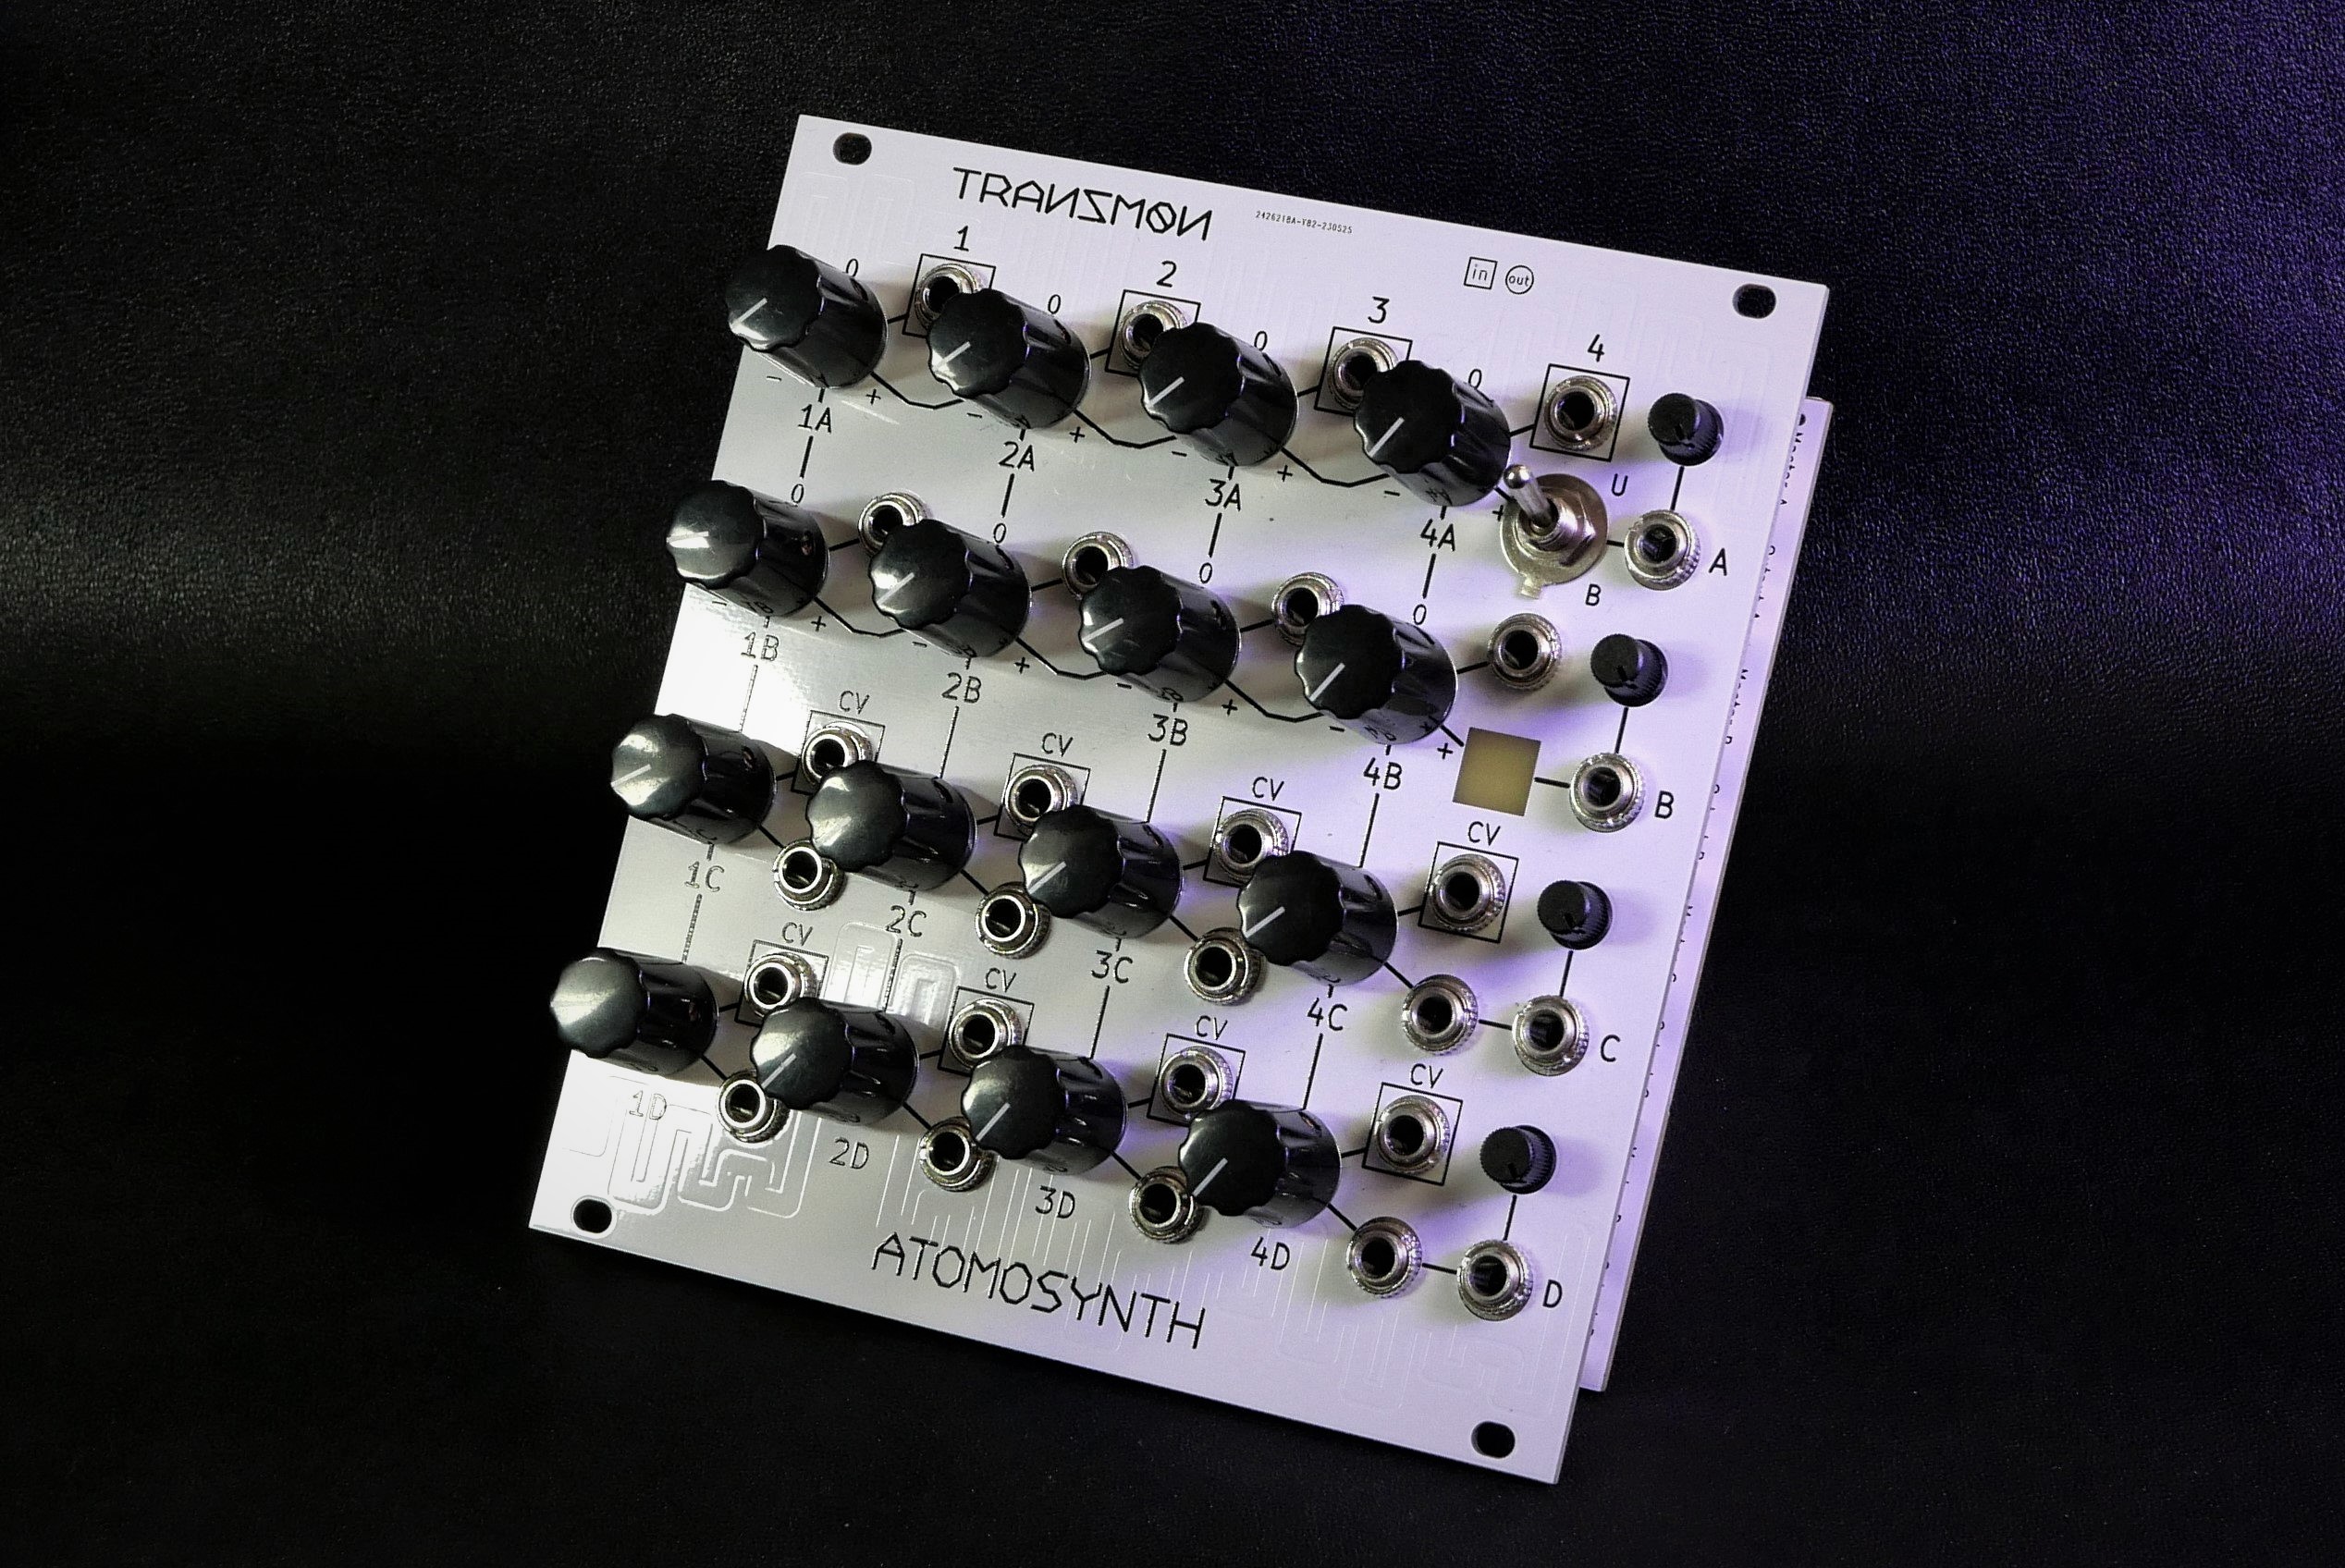 atomosynth transmon mixer and other gear picture